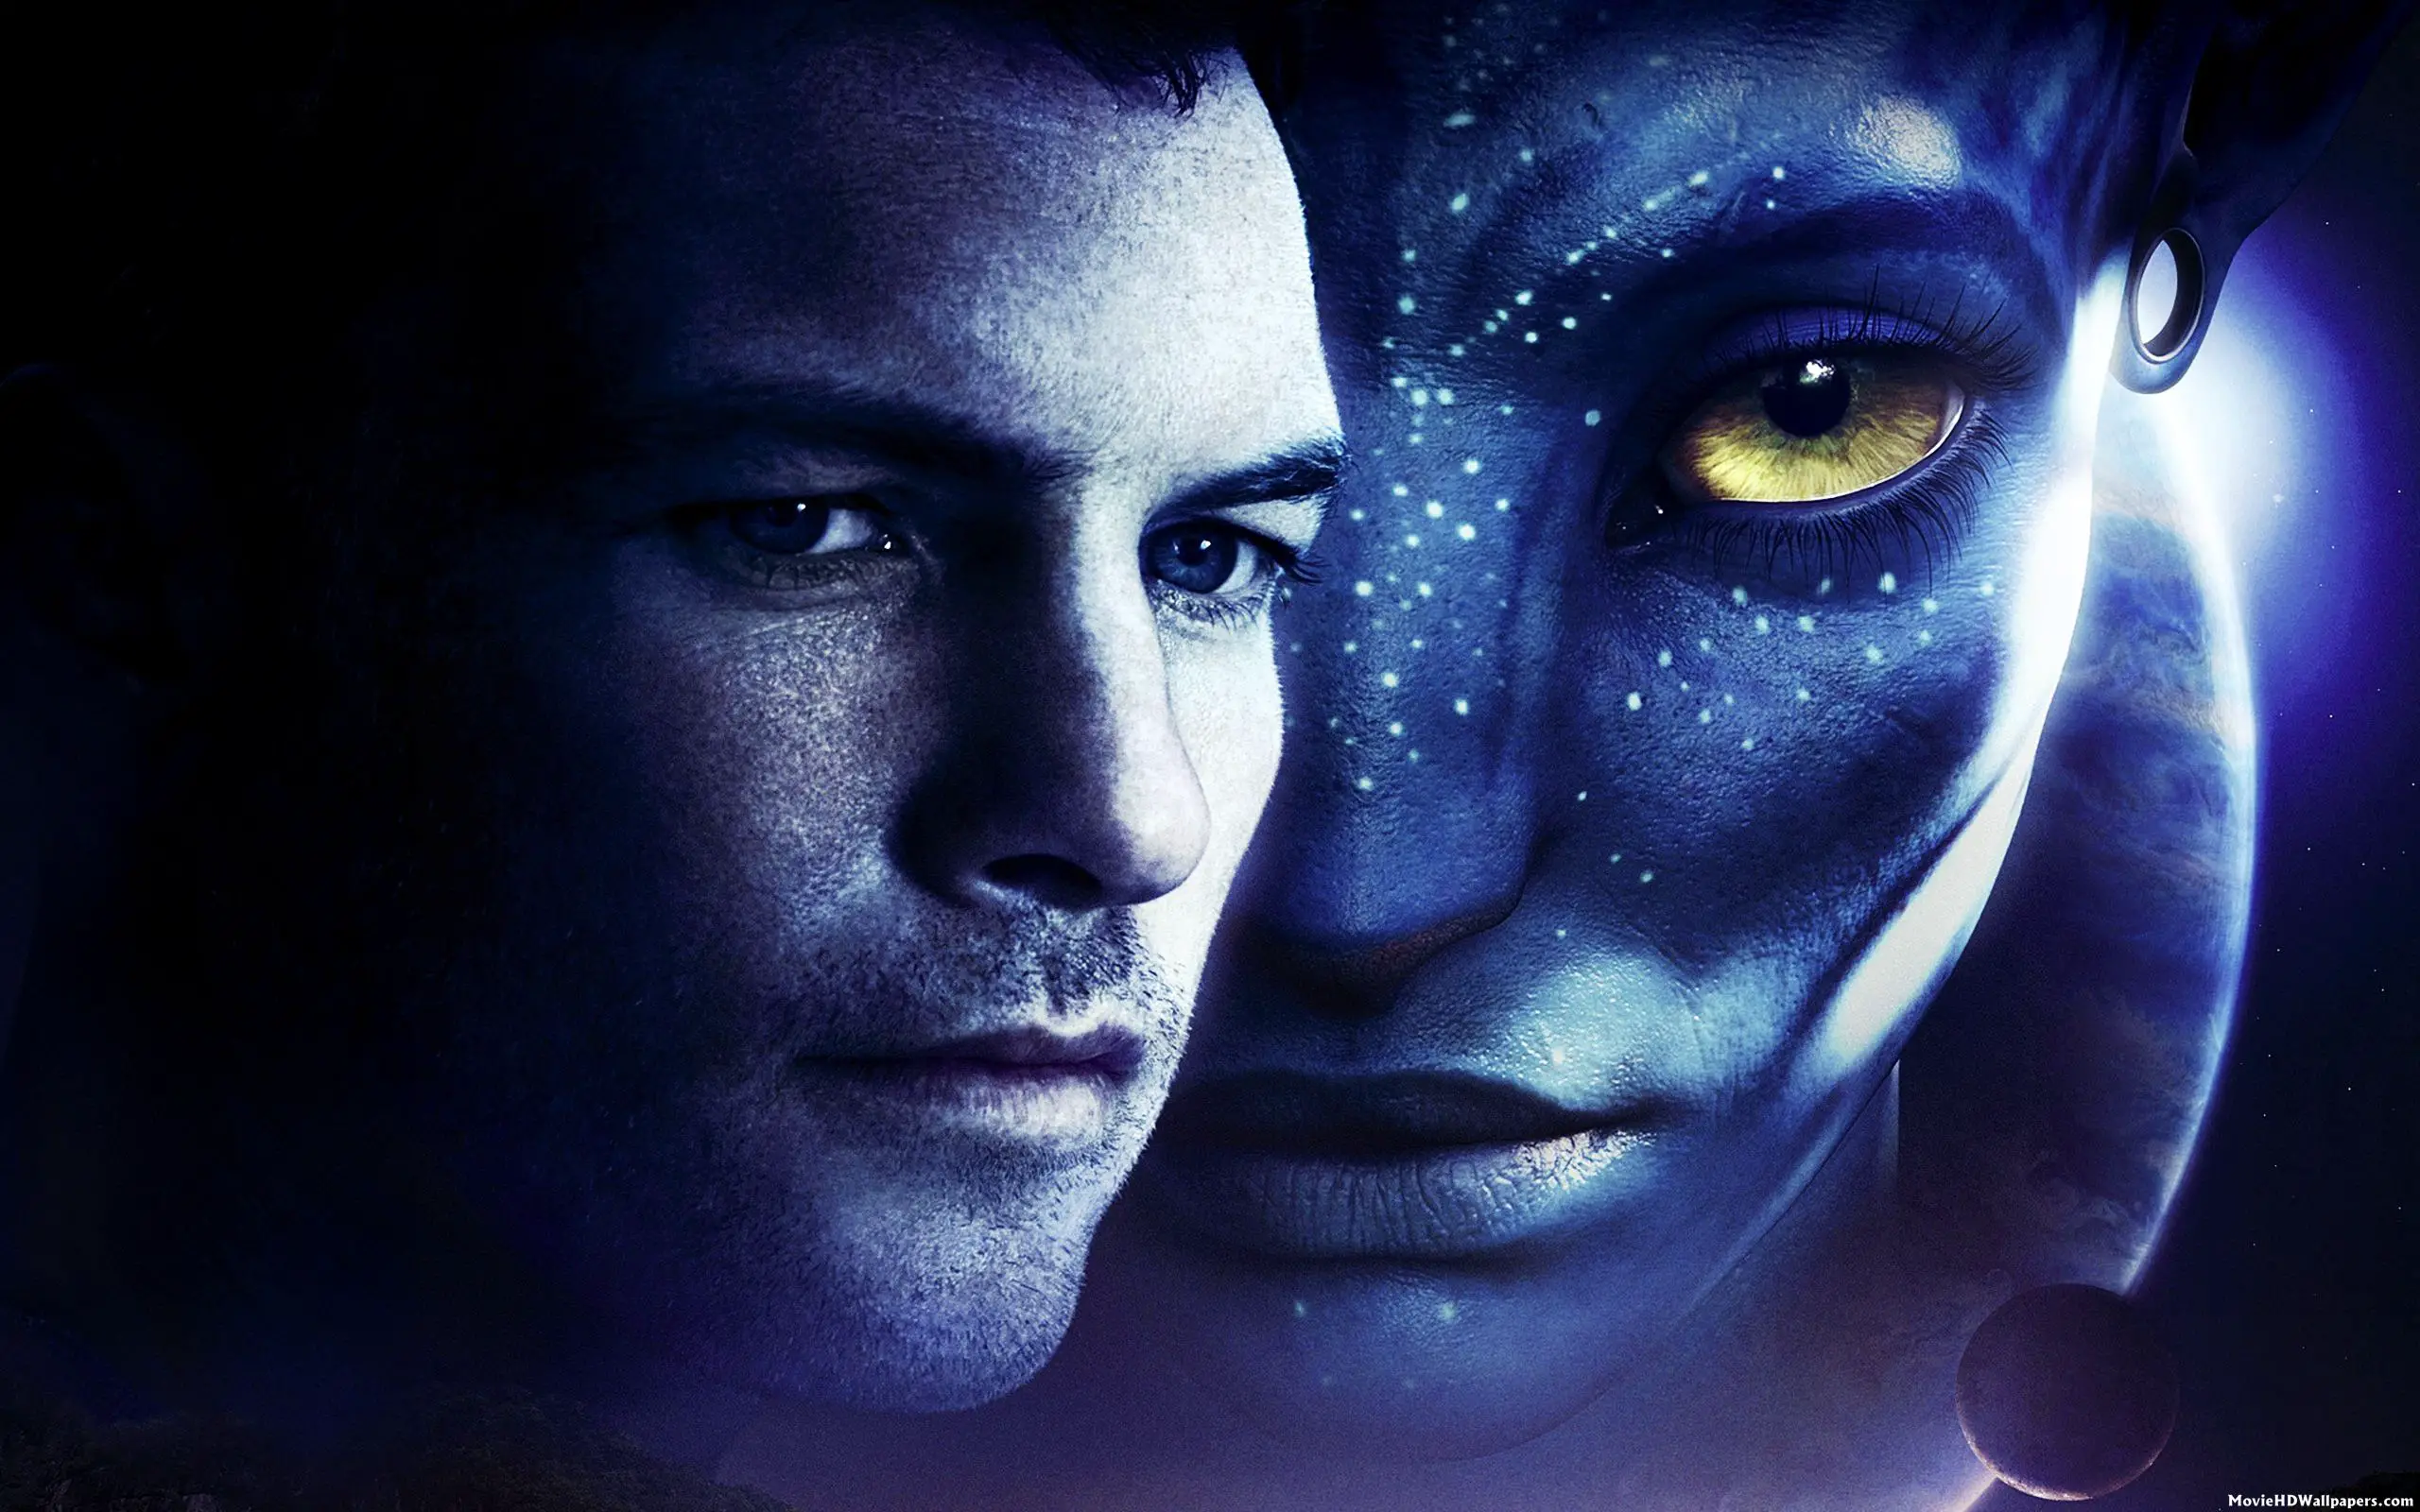 Avatar 2 - Movie HD Wallpapers